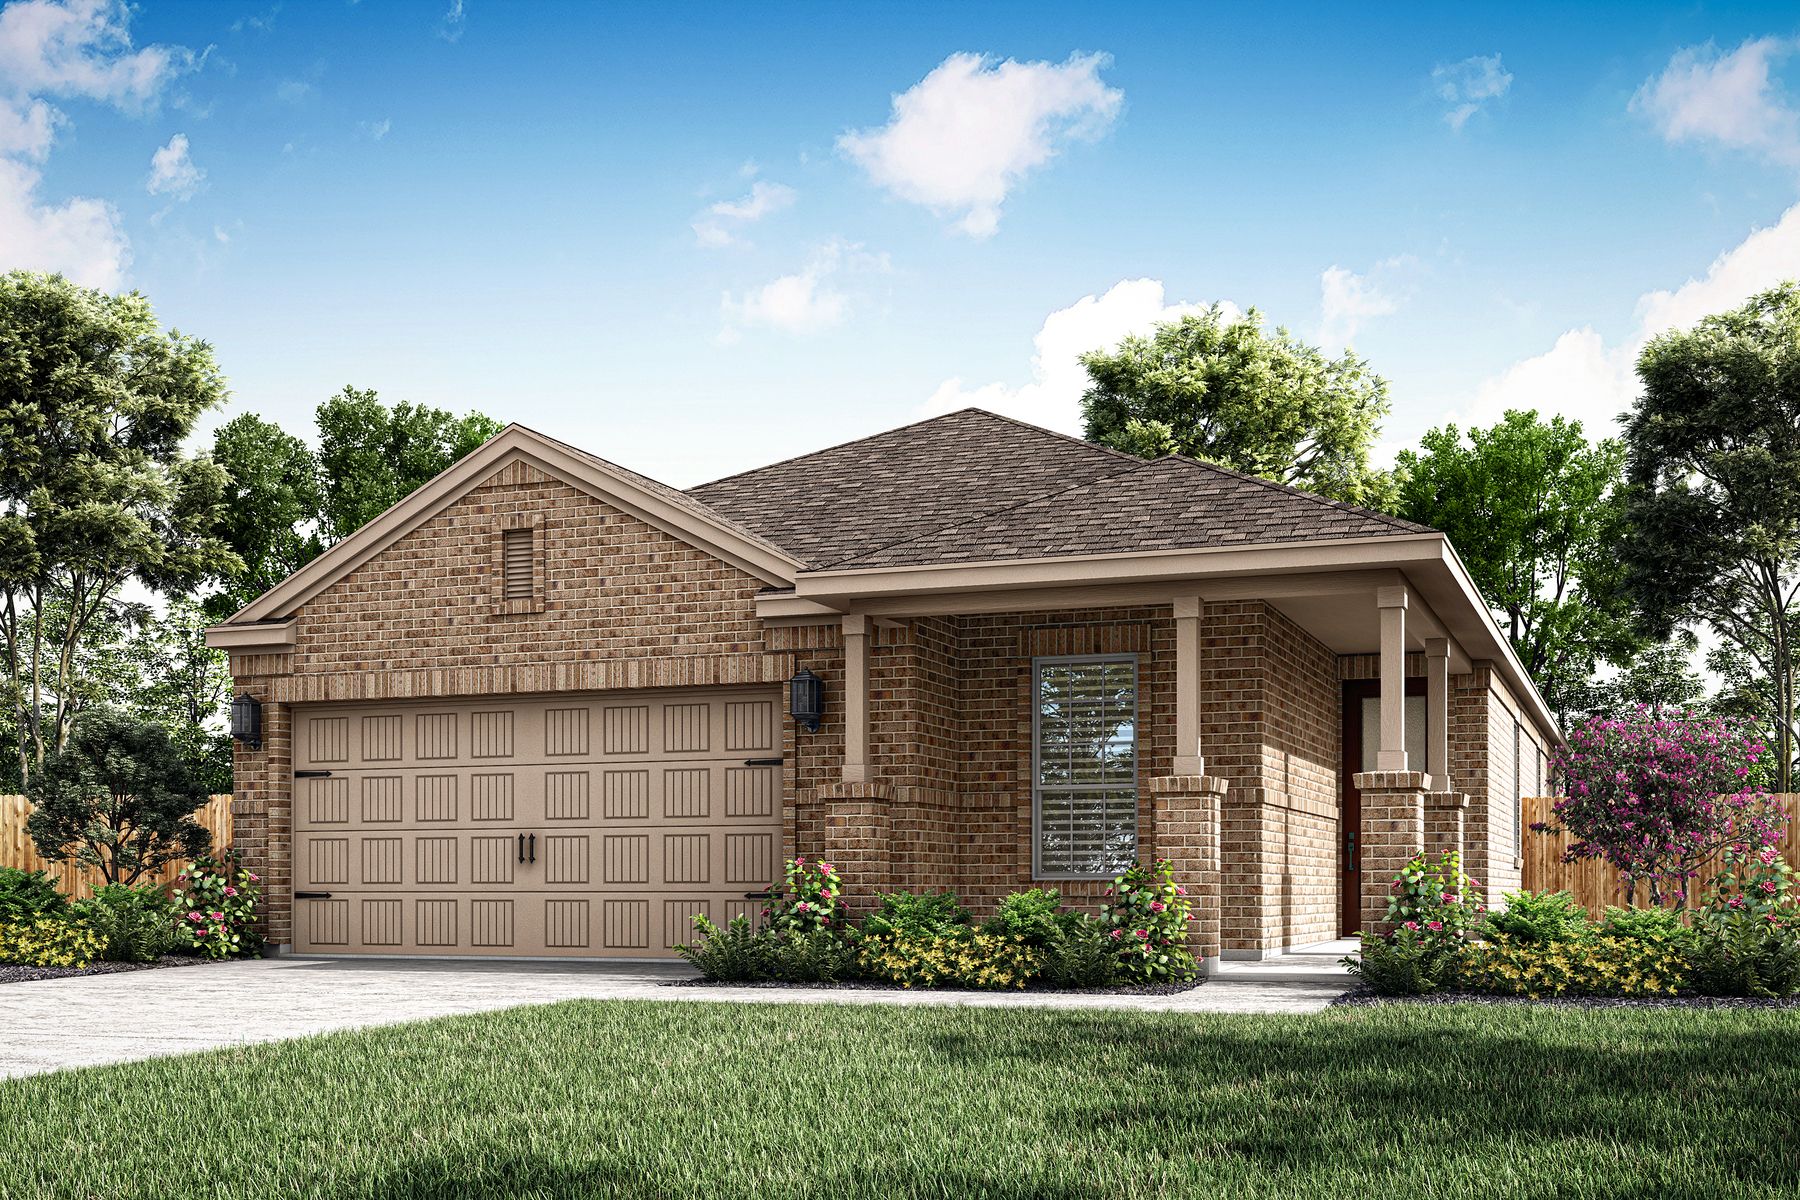 LGI Homes at Emberly:At Emberly, find a variety of homes with spacious interiors and designer finishes.